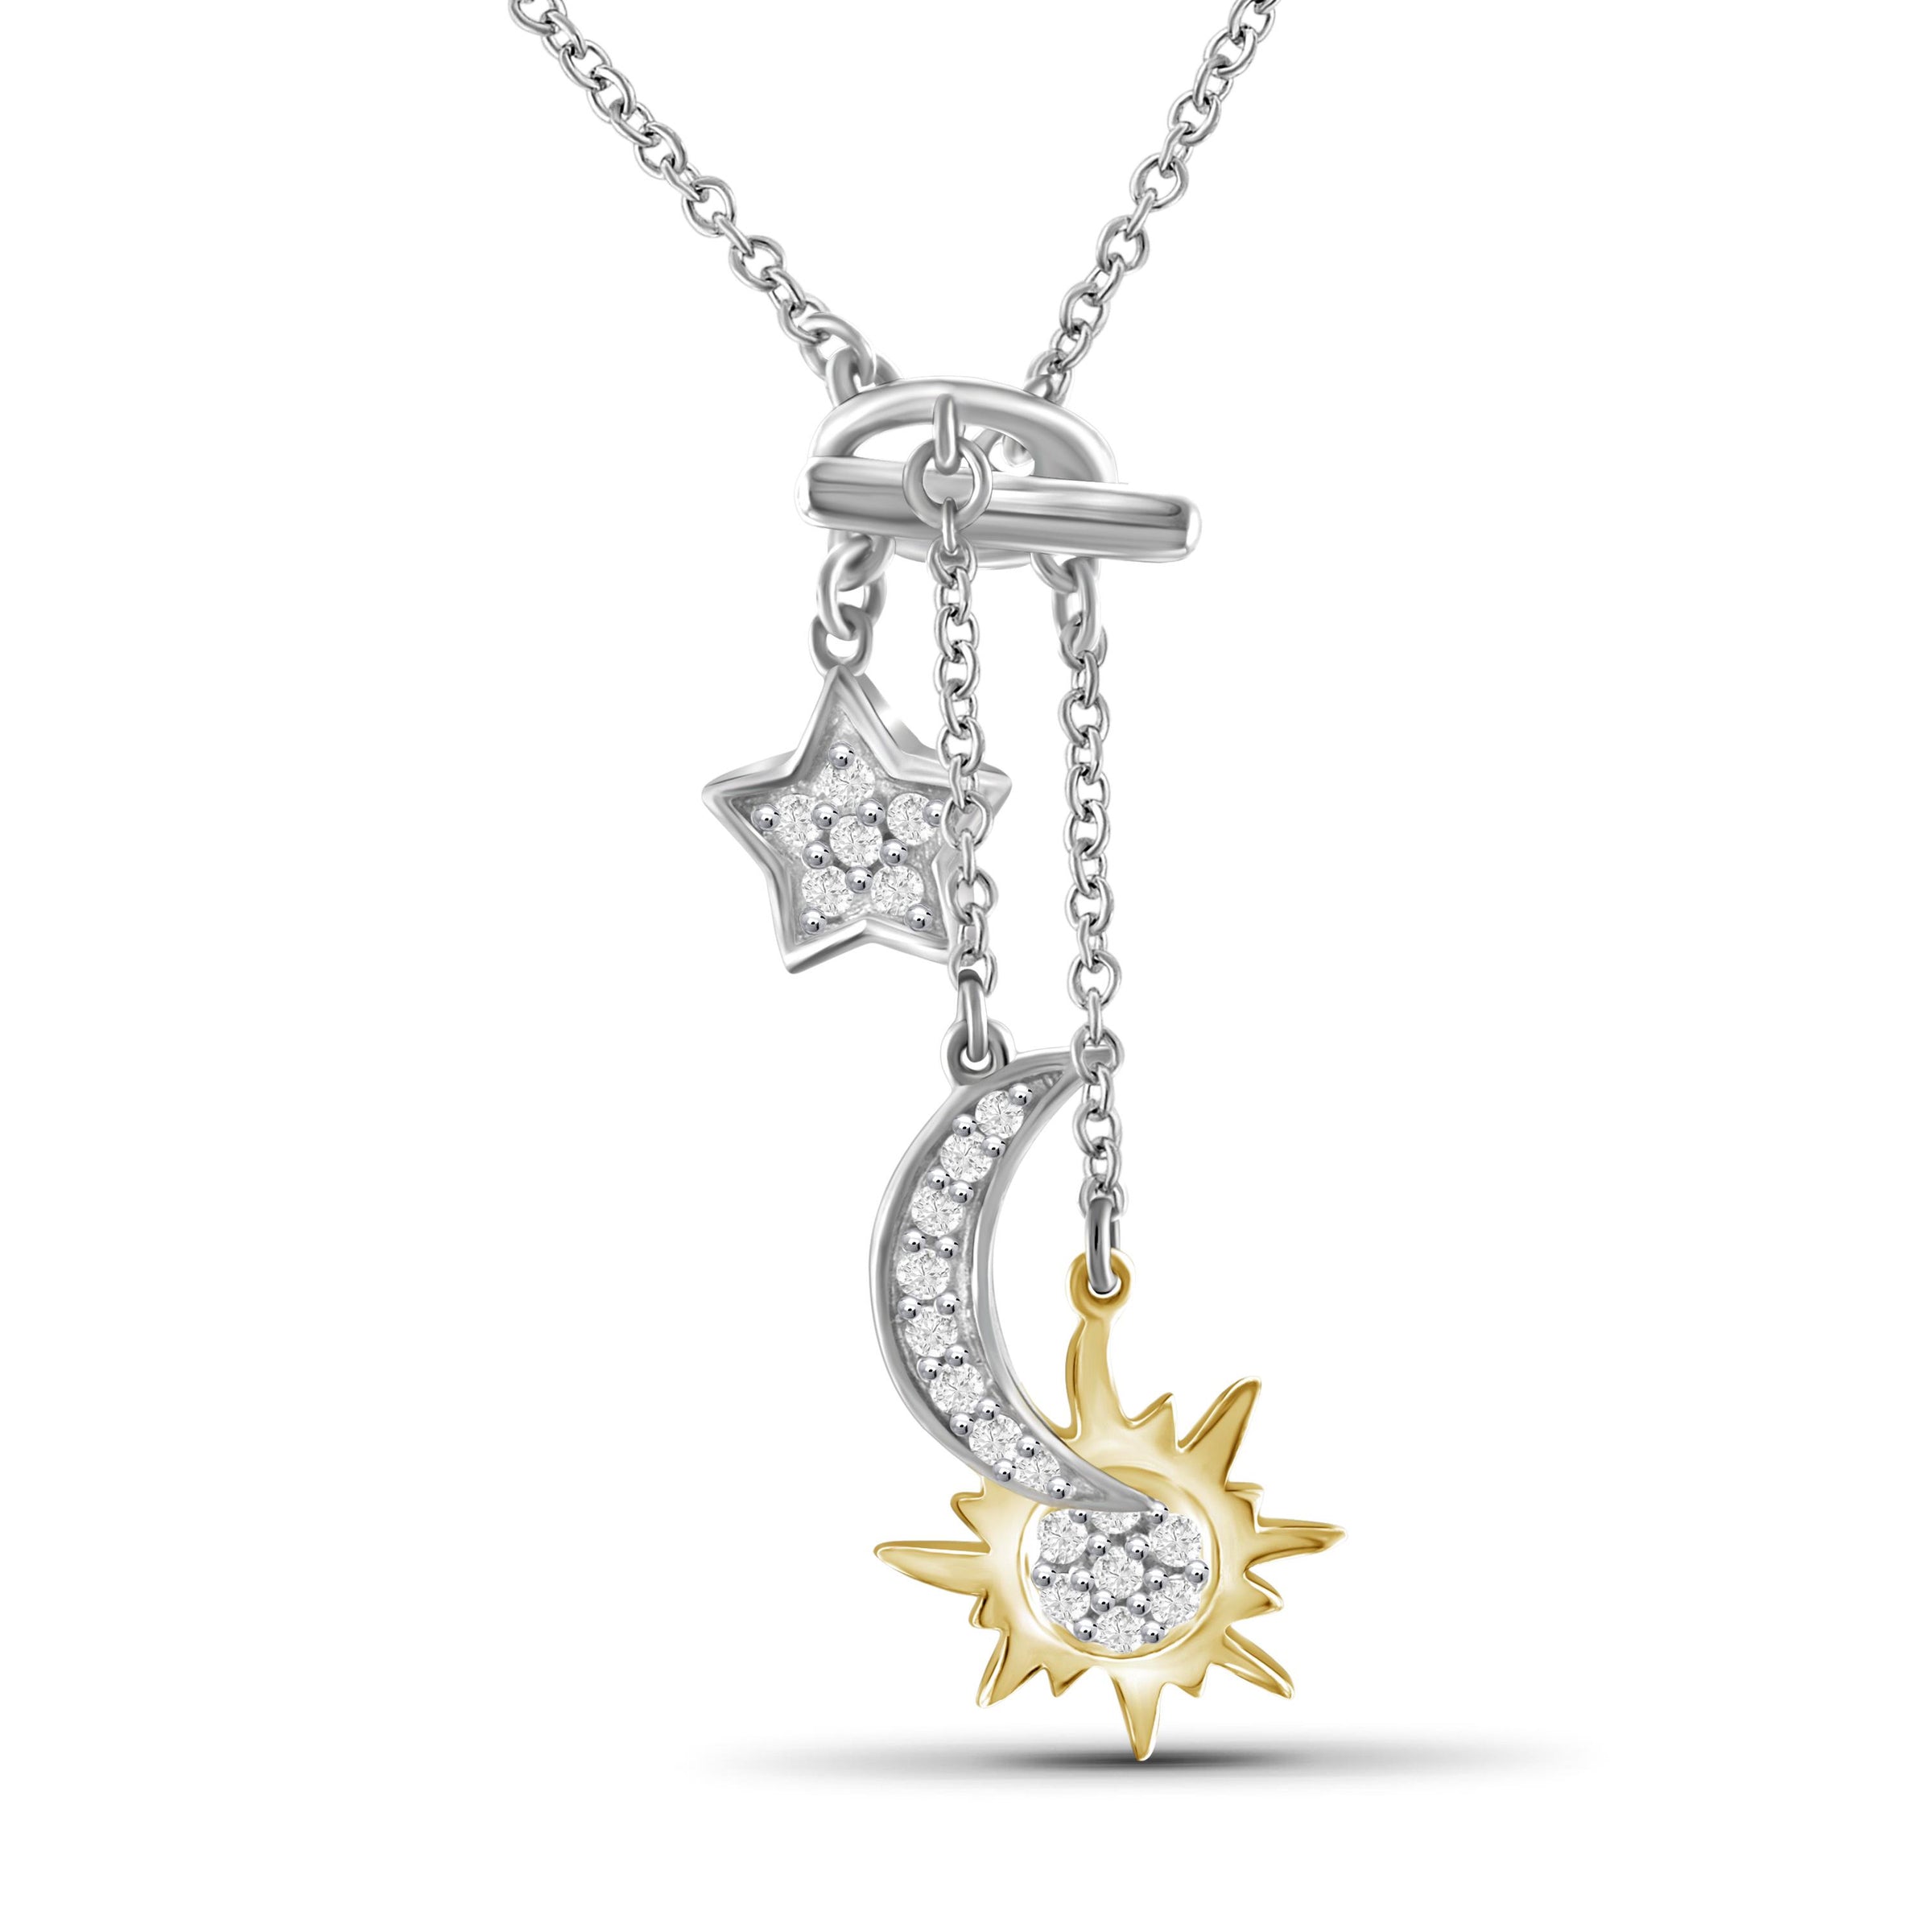 COLORFUL BLING Stainless Steel Sun and Moon Star Necklace 3 Best Friend  Friendship Sister Set for Women Teens Girls Mom Daughter BFF Jewelry Gifts,  Metal, alloy, : Amazon.in: Fashion